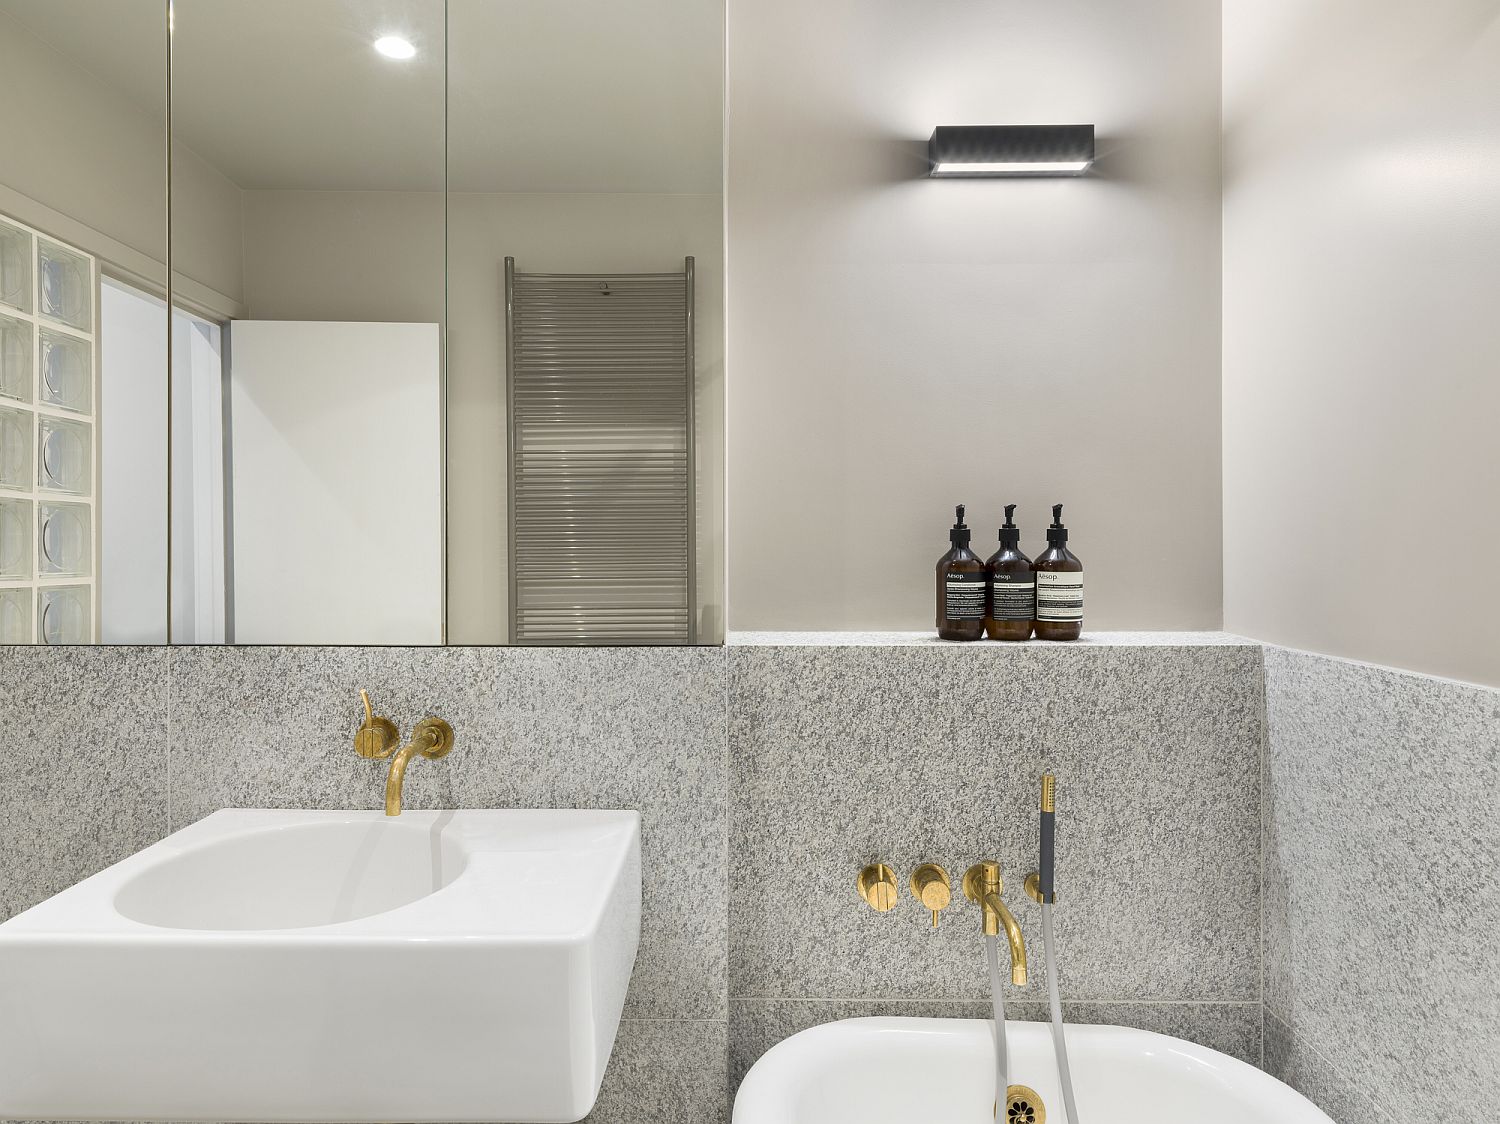 Metallic glint brings brightness to this modern bathroom in white and gray